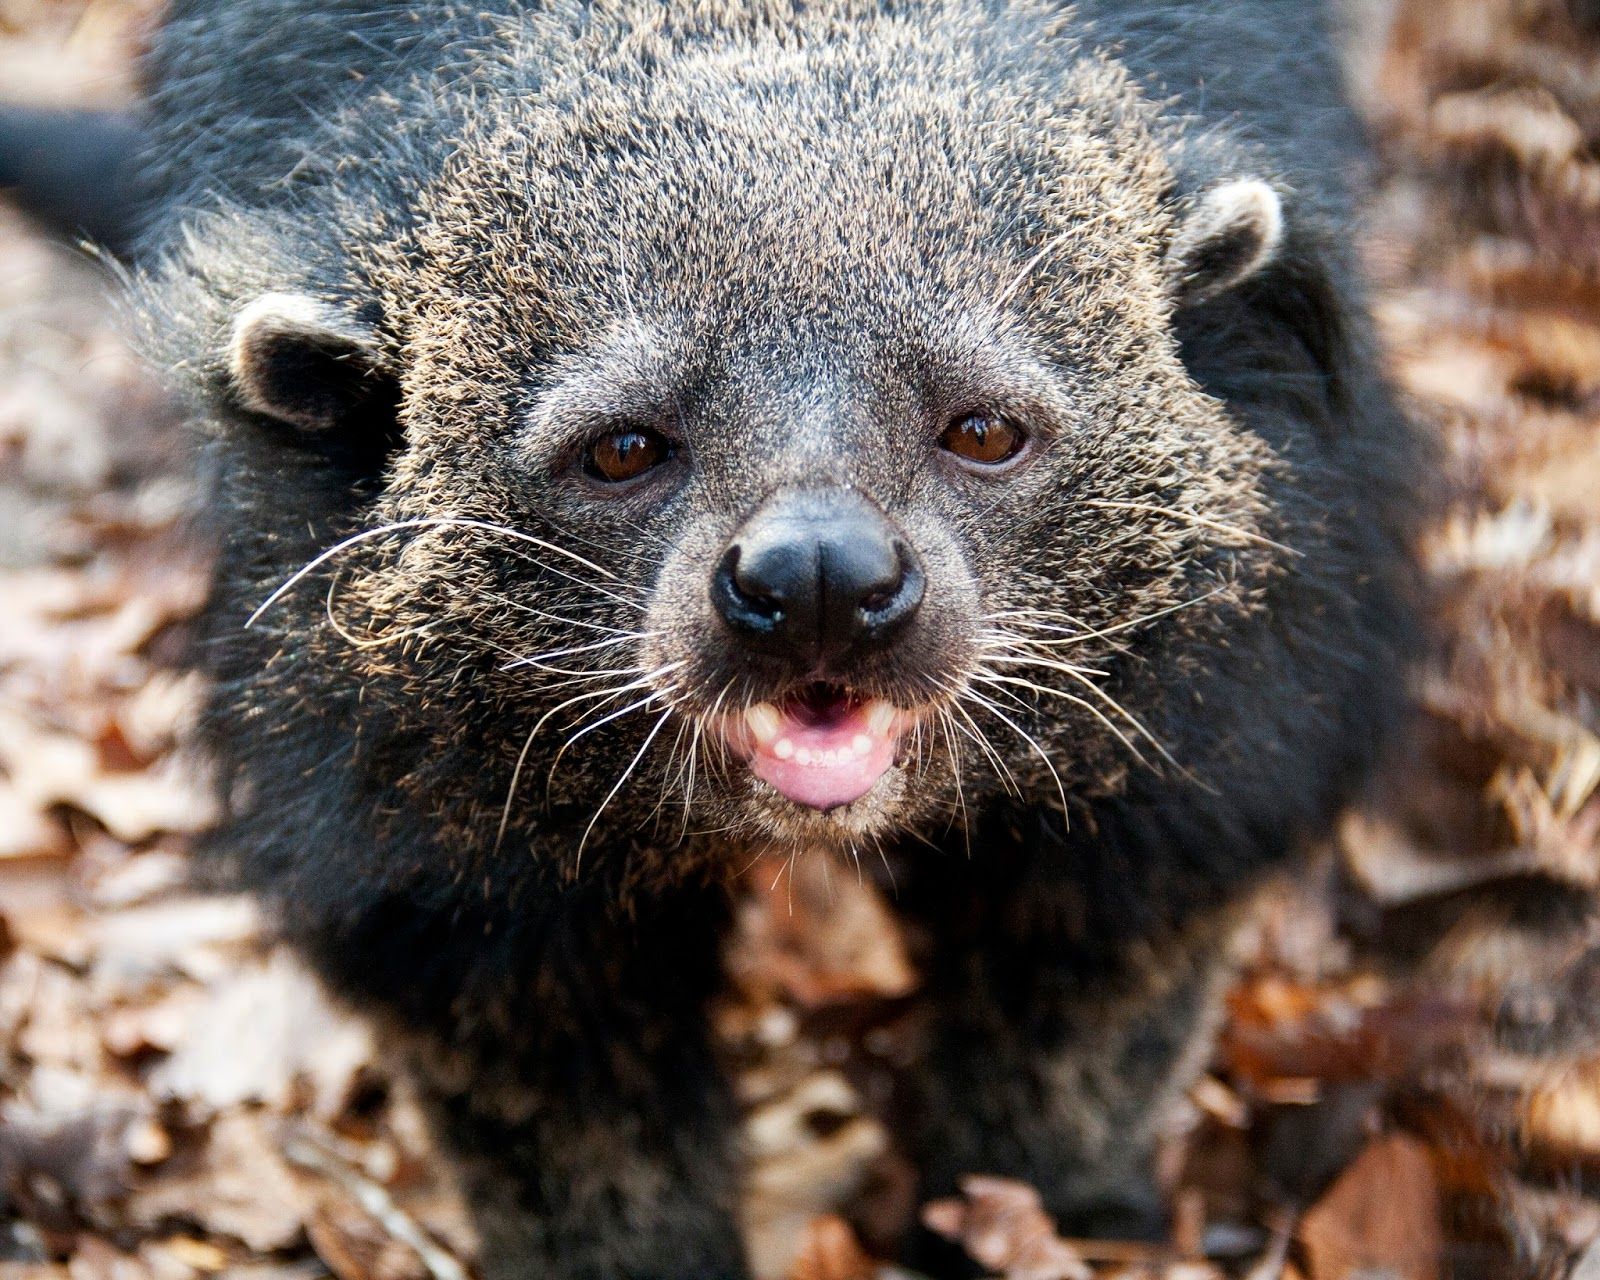 Fun Animals Wiki, Videos, Picture, Stories: Cute Animal Feature Scented Binturong